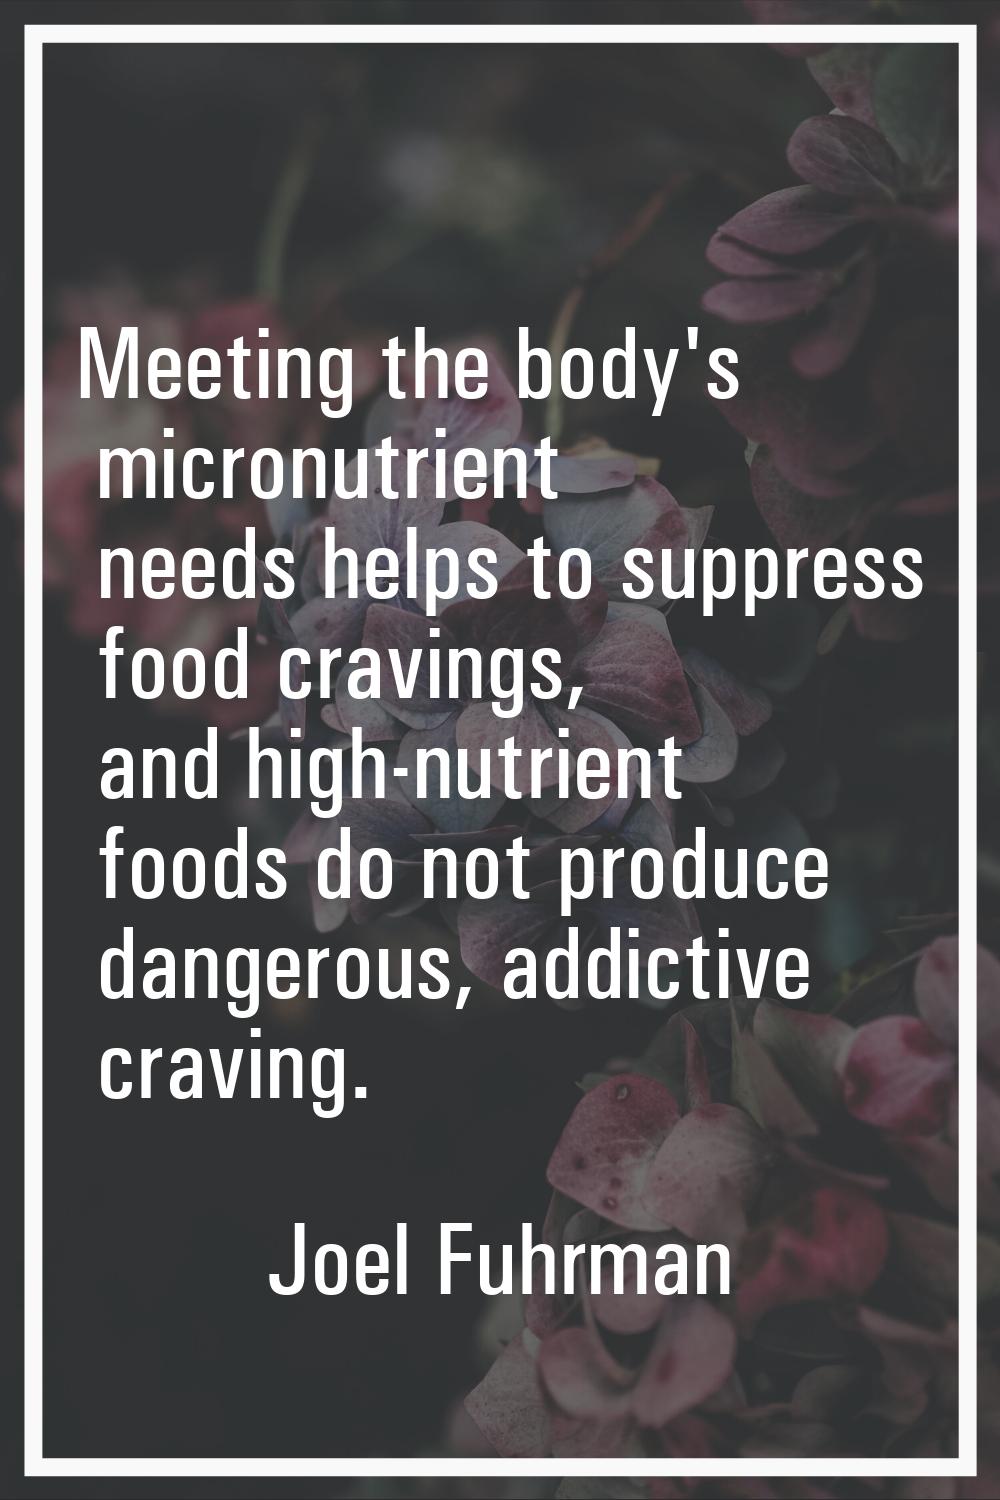 Meeting the body's micronutrient needs helps to suppress food cravings, and high-nutrient foods do 